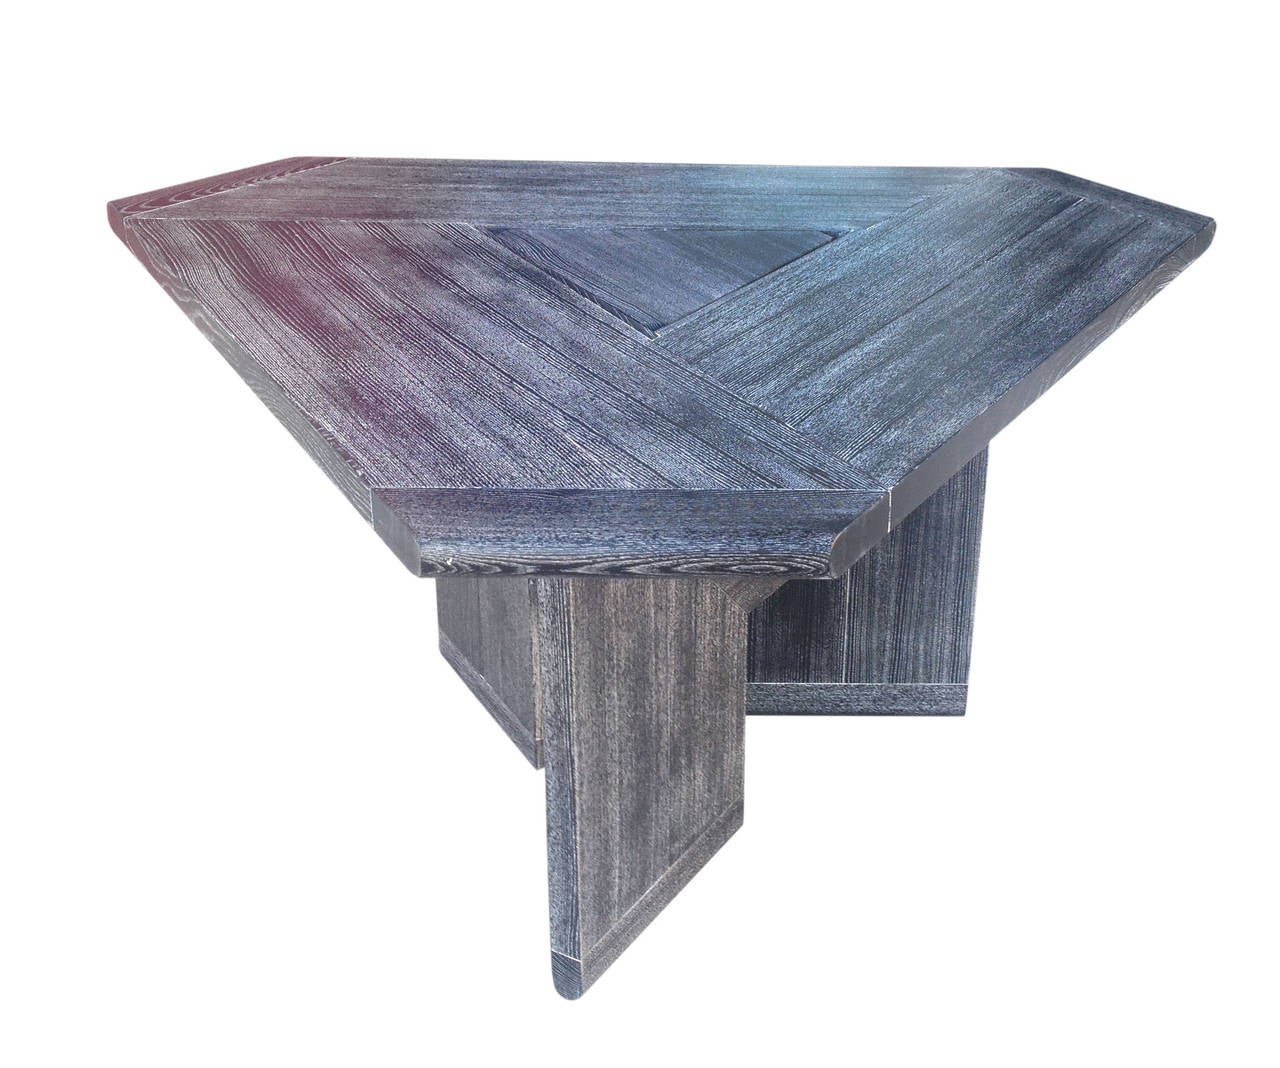 This functional and elegant dining table features a unique triangular surface supported by three very architectural L-shaped legs. A hidden compartment in the center of the table is revealed by lifting off a triangular lid which has been made